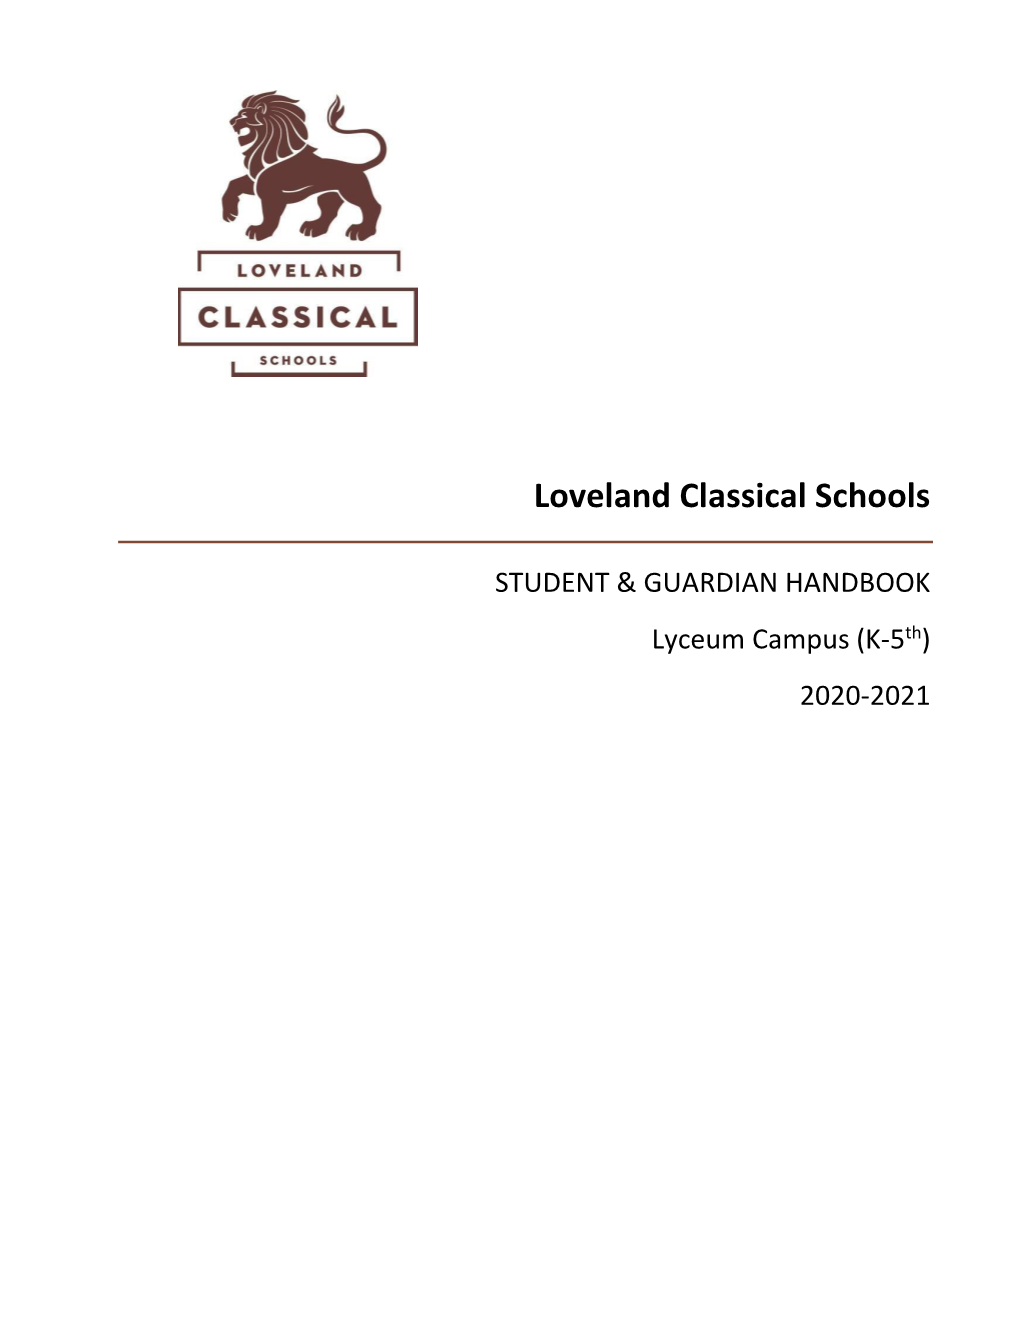 LCS Student Handbook Rev K 20/21 Directory Loveland Classical Elementary School @ the Lyceum Campus 3835 14Th St